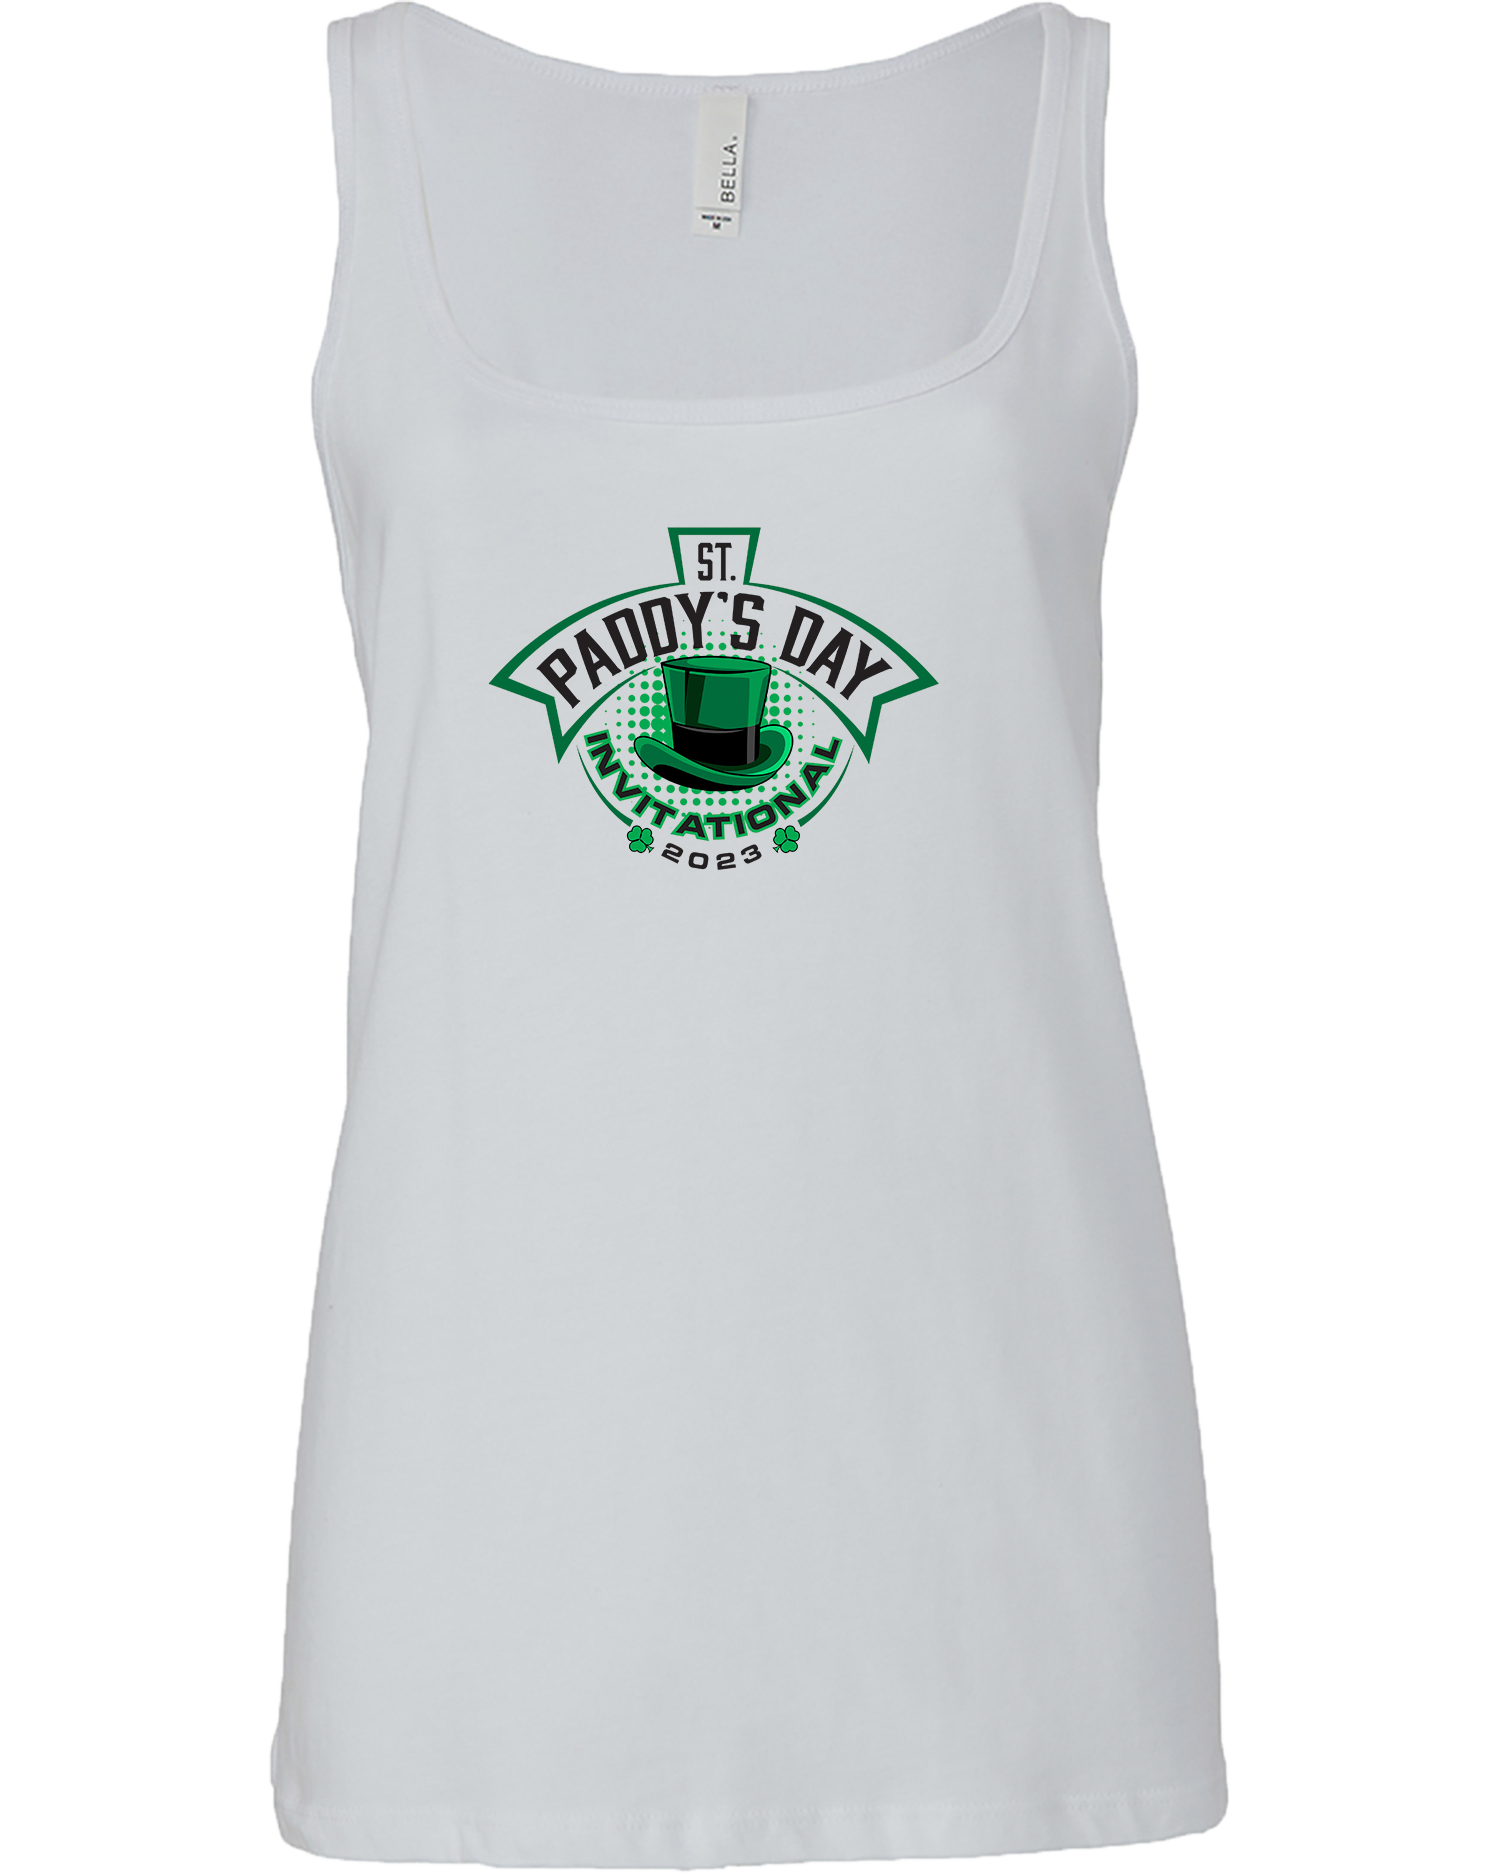 TANK TOP - 2023 St. Paddy's Day Invitational